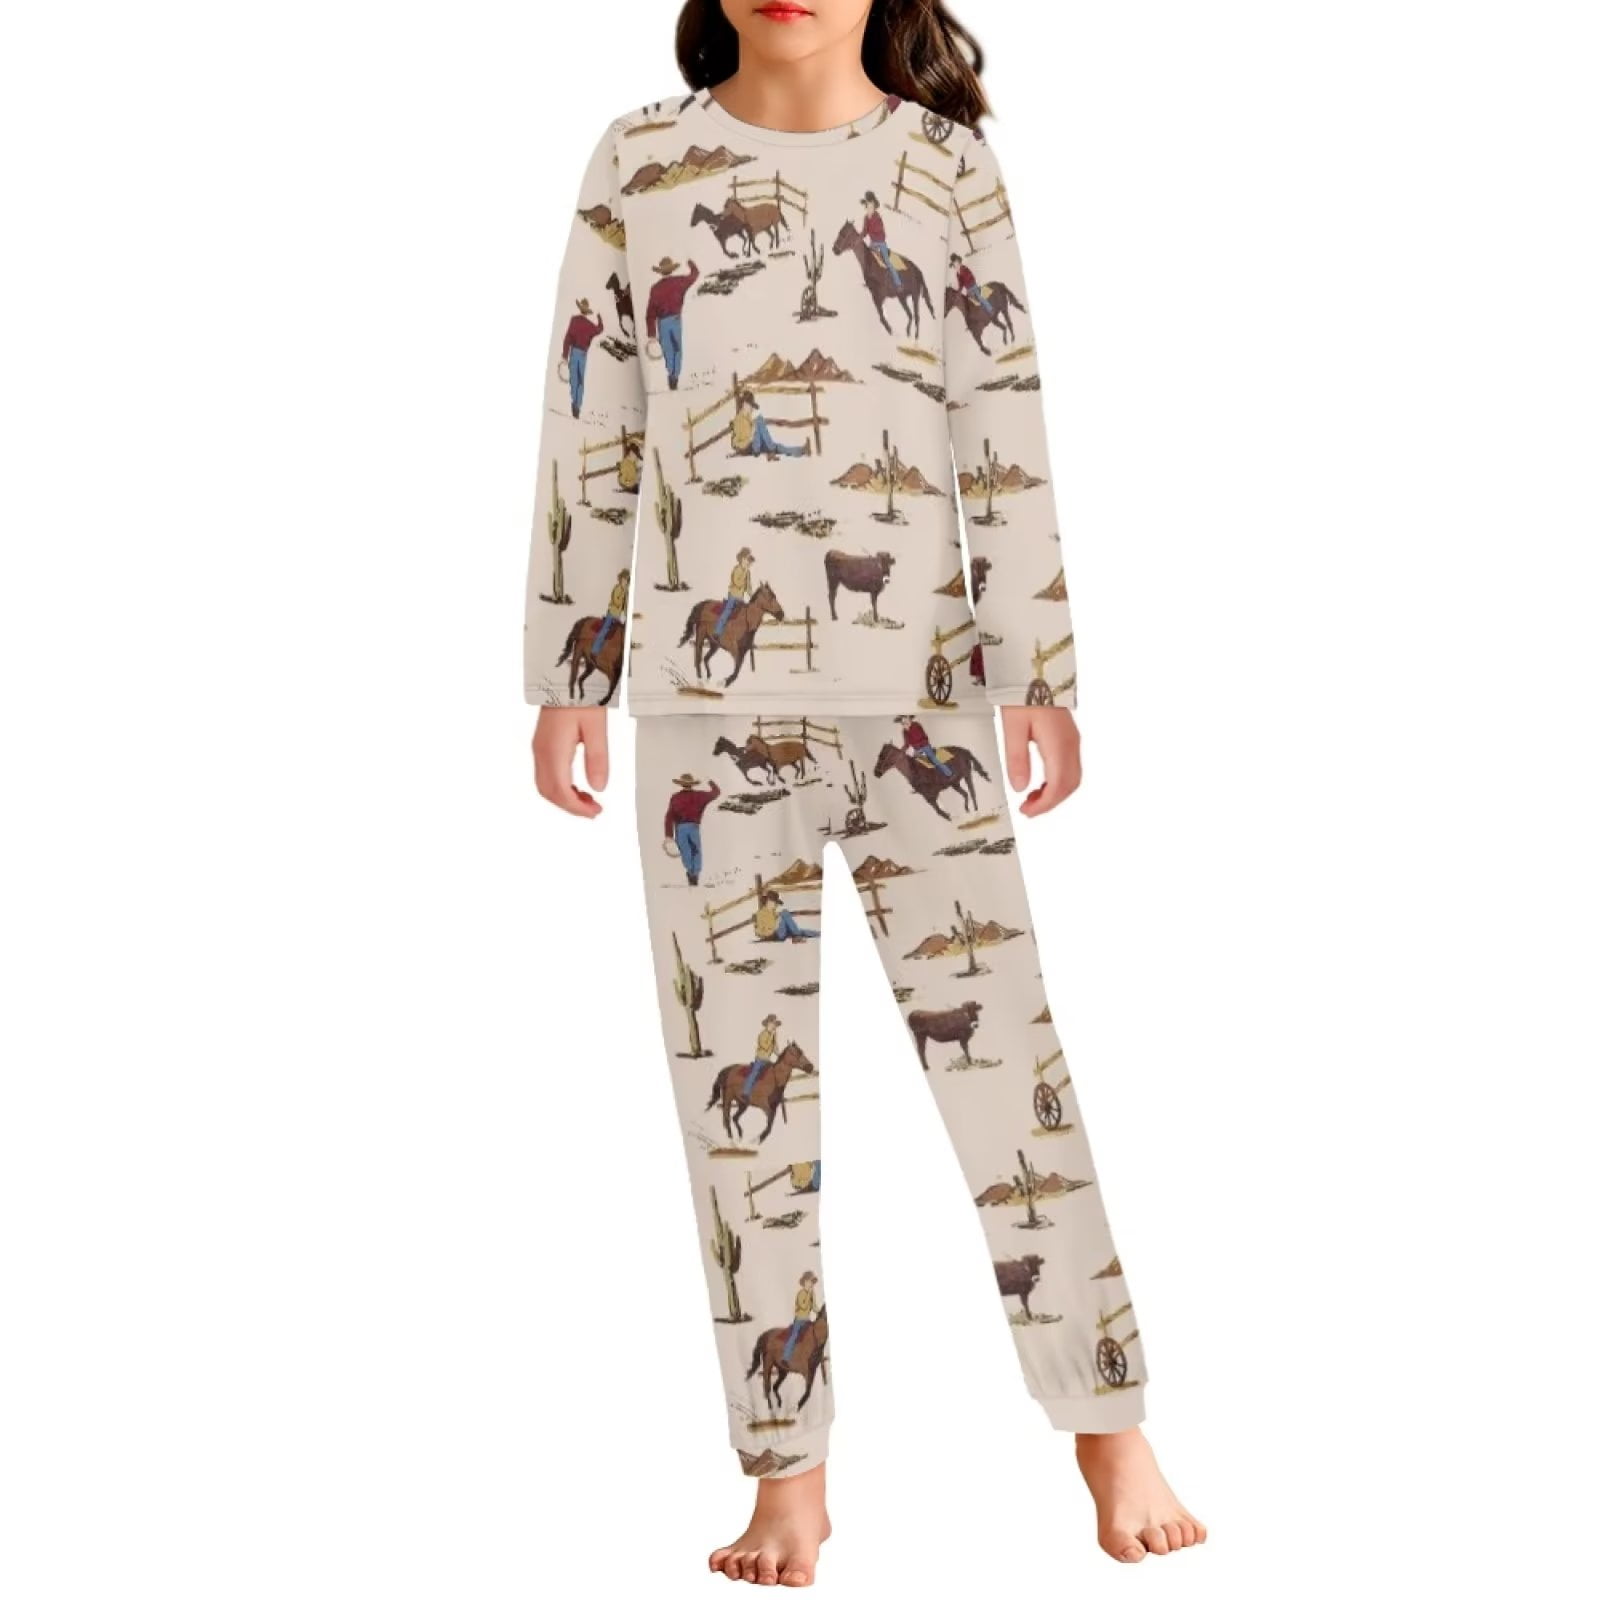 Planets Pajama Sets, Cute Sleepwear for Teenagers and Adults, Women's  Pajamas, Gift Ideas for Birthday, Christmas, Friends, Wife, Daughter